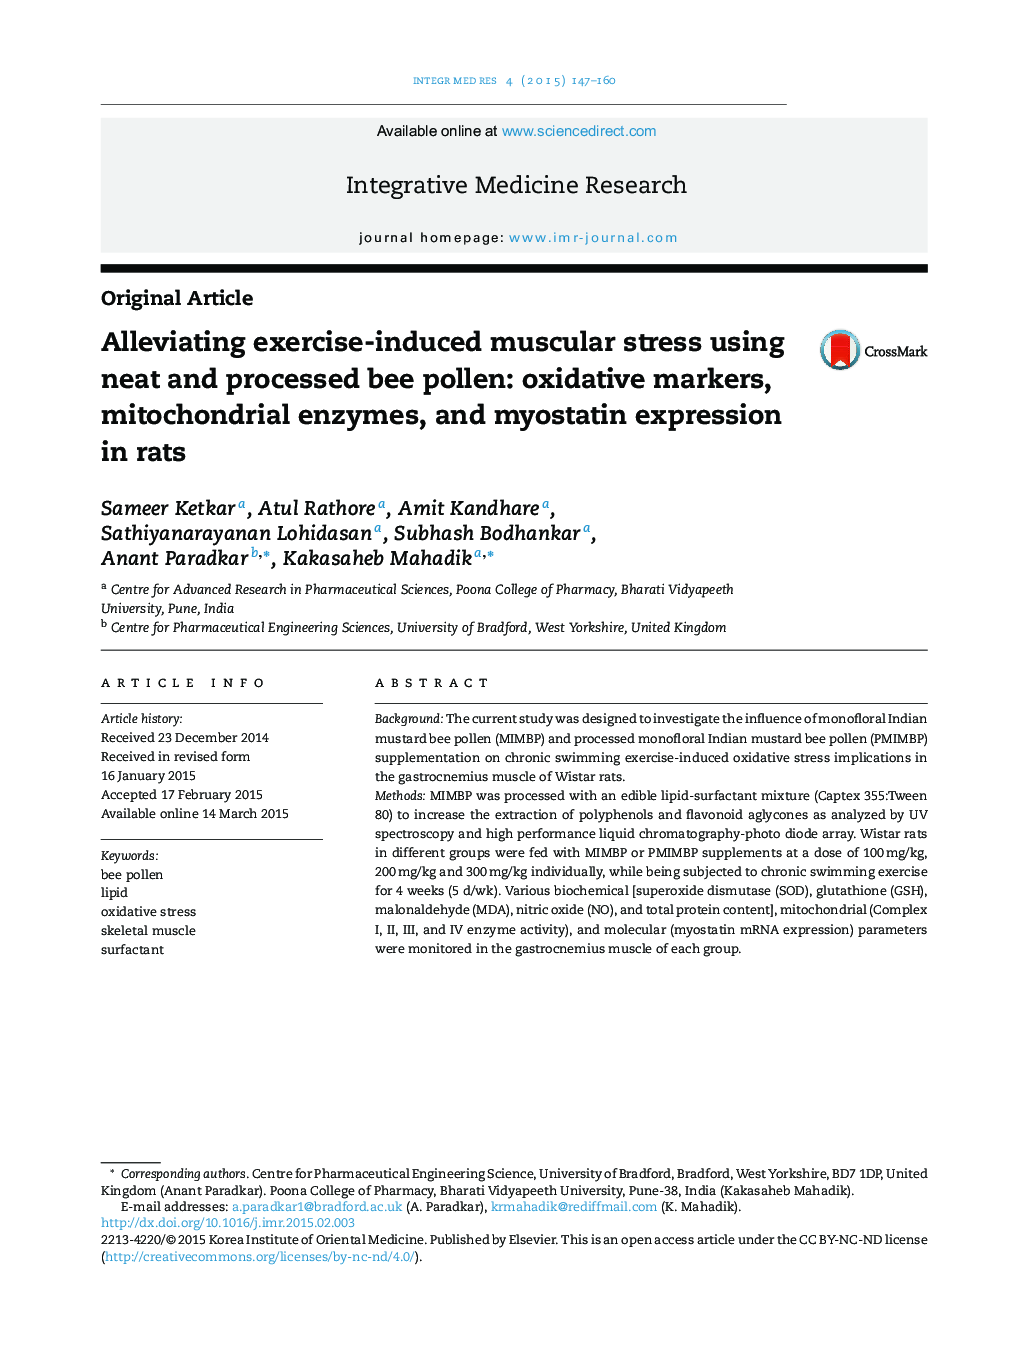 Alleviating exercise-induced muscular stress using neat and processed bee pollen: oxidative markers, mitochondrial enzymes, and myostatin expression in rats